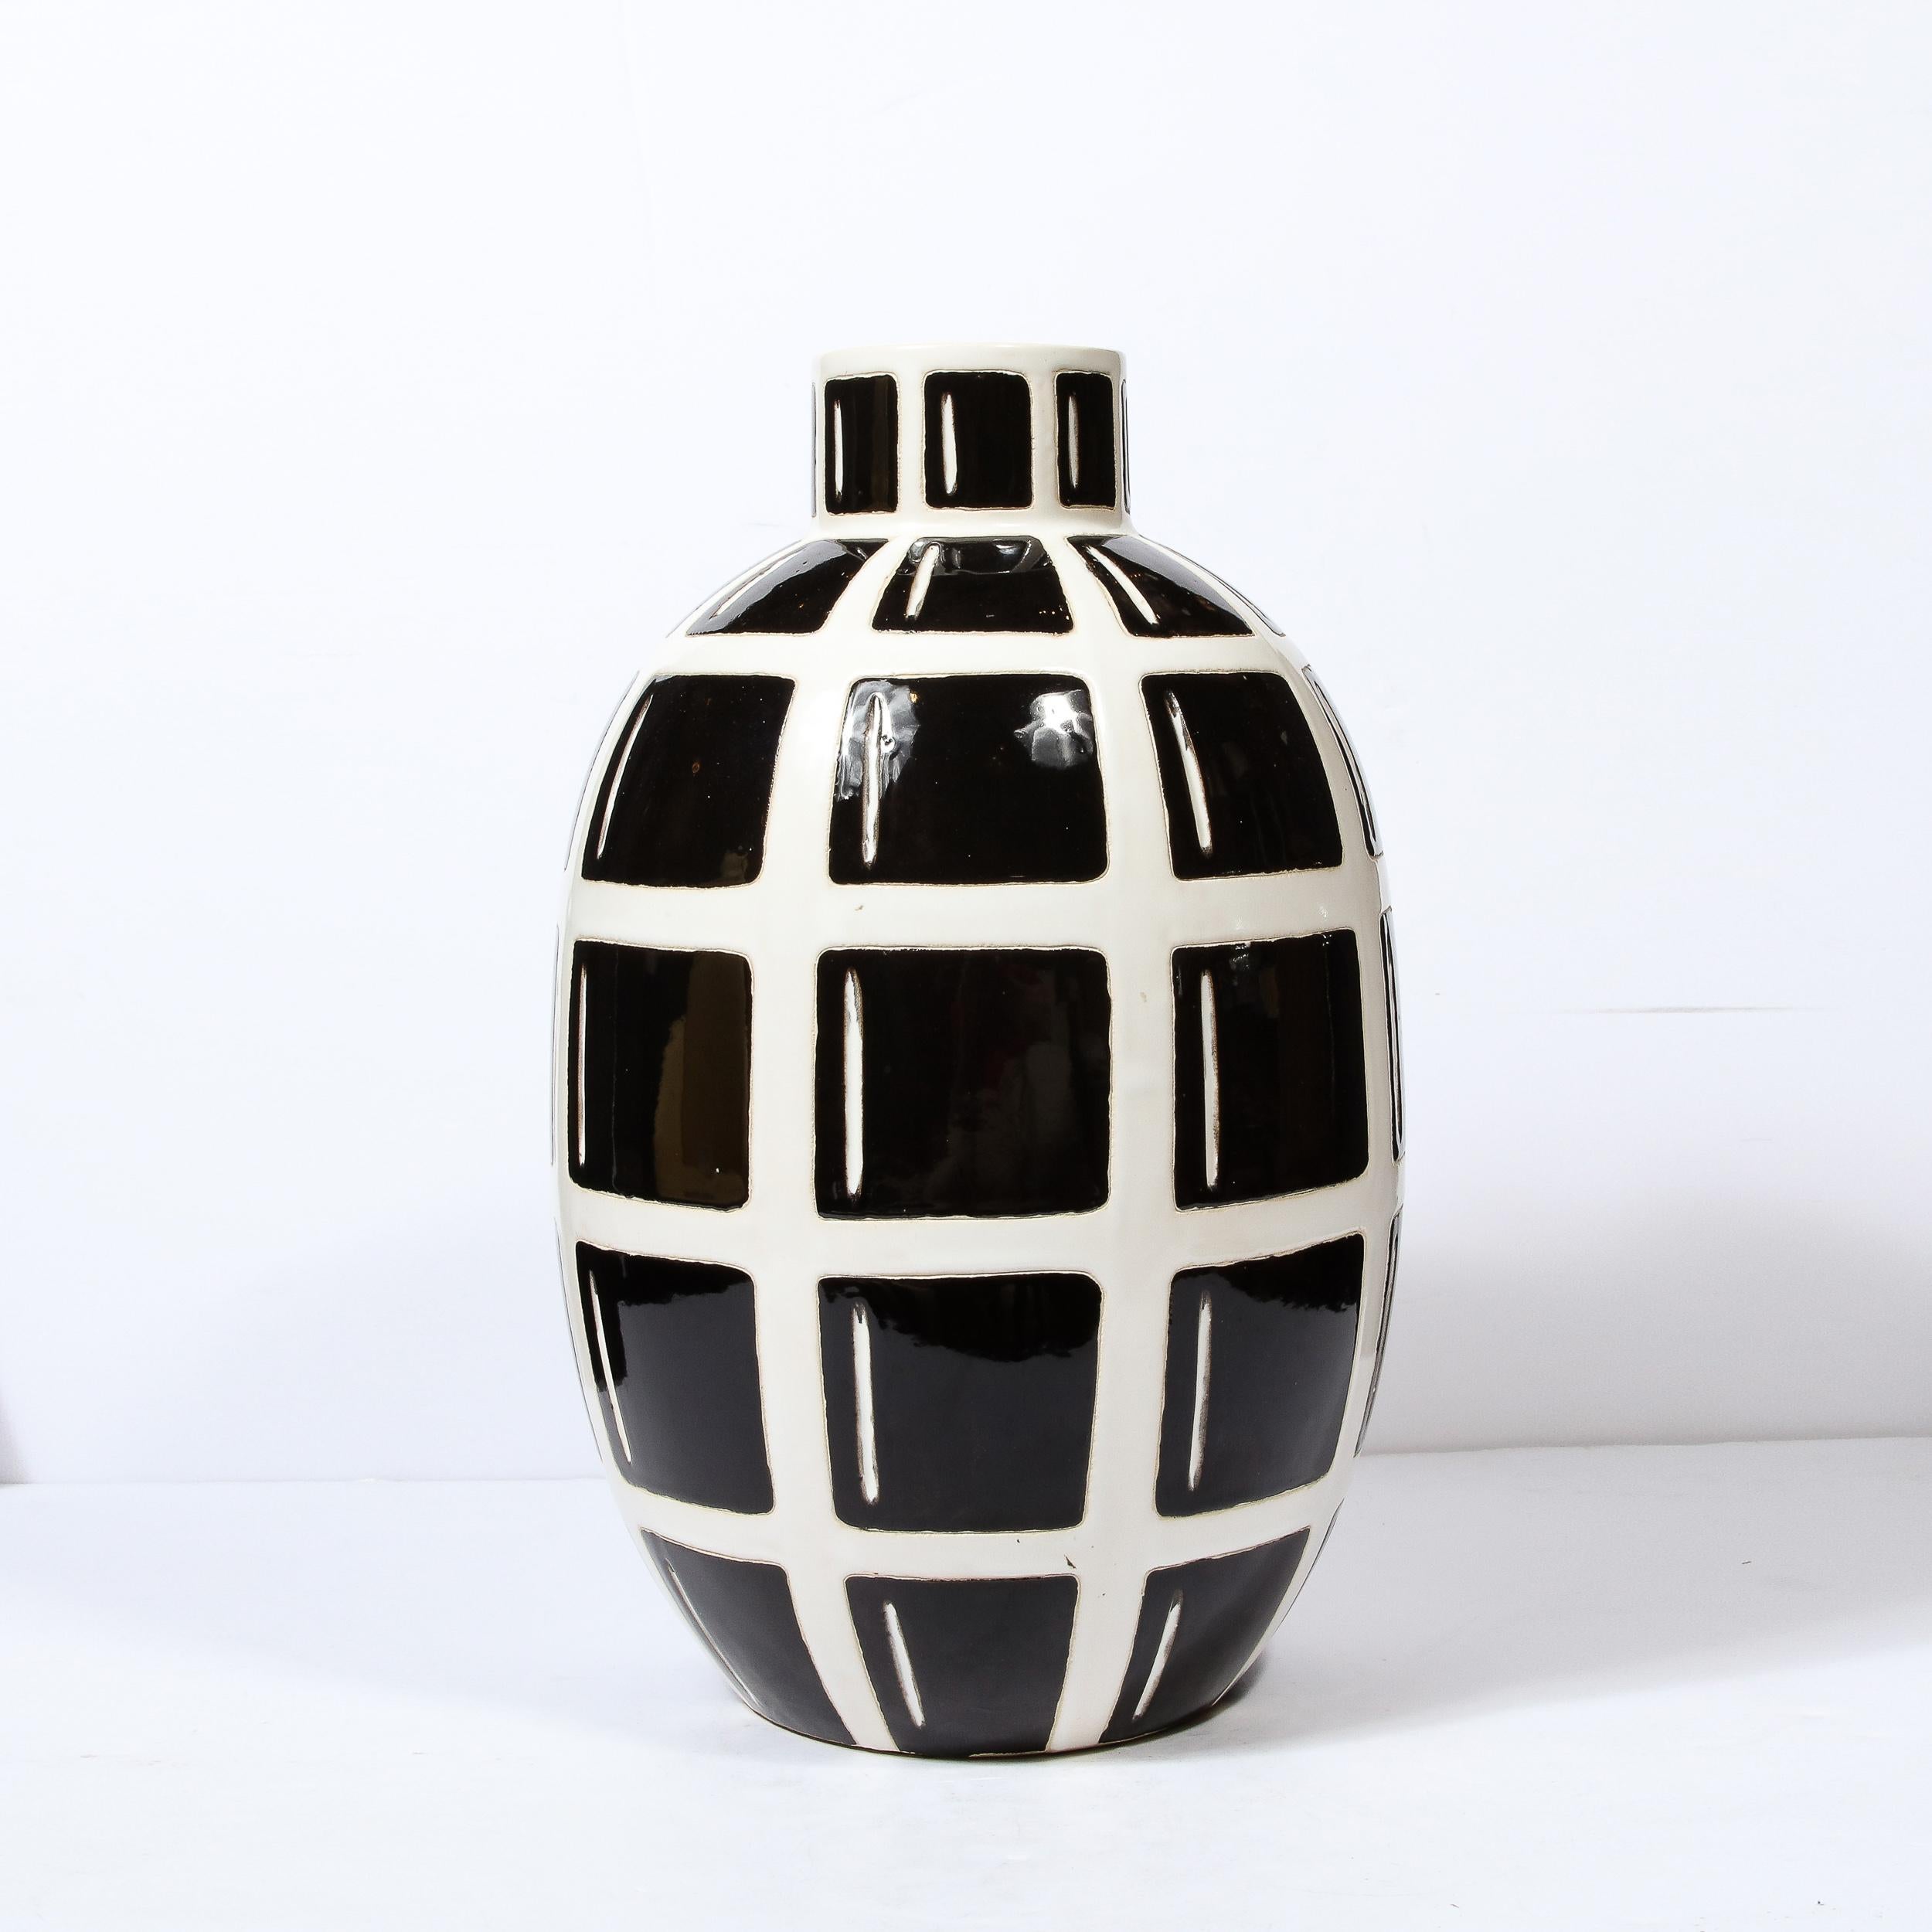 This bold and striking Mid-Century Modern ceramic vase was realized in the United States circa 1970. It features an elliptical black body with a grid form in white- offering a dramatic contrast- that resembles a stylized take on the hand grenade.